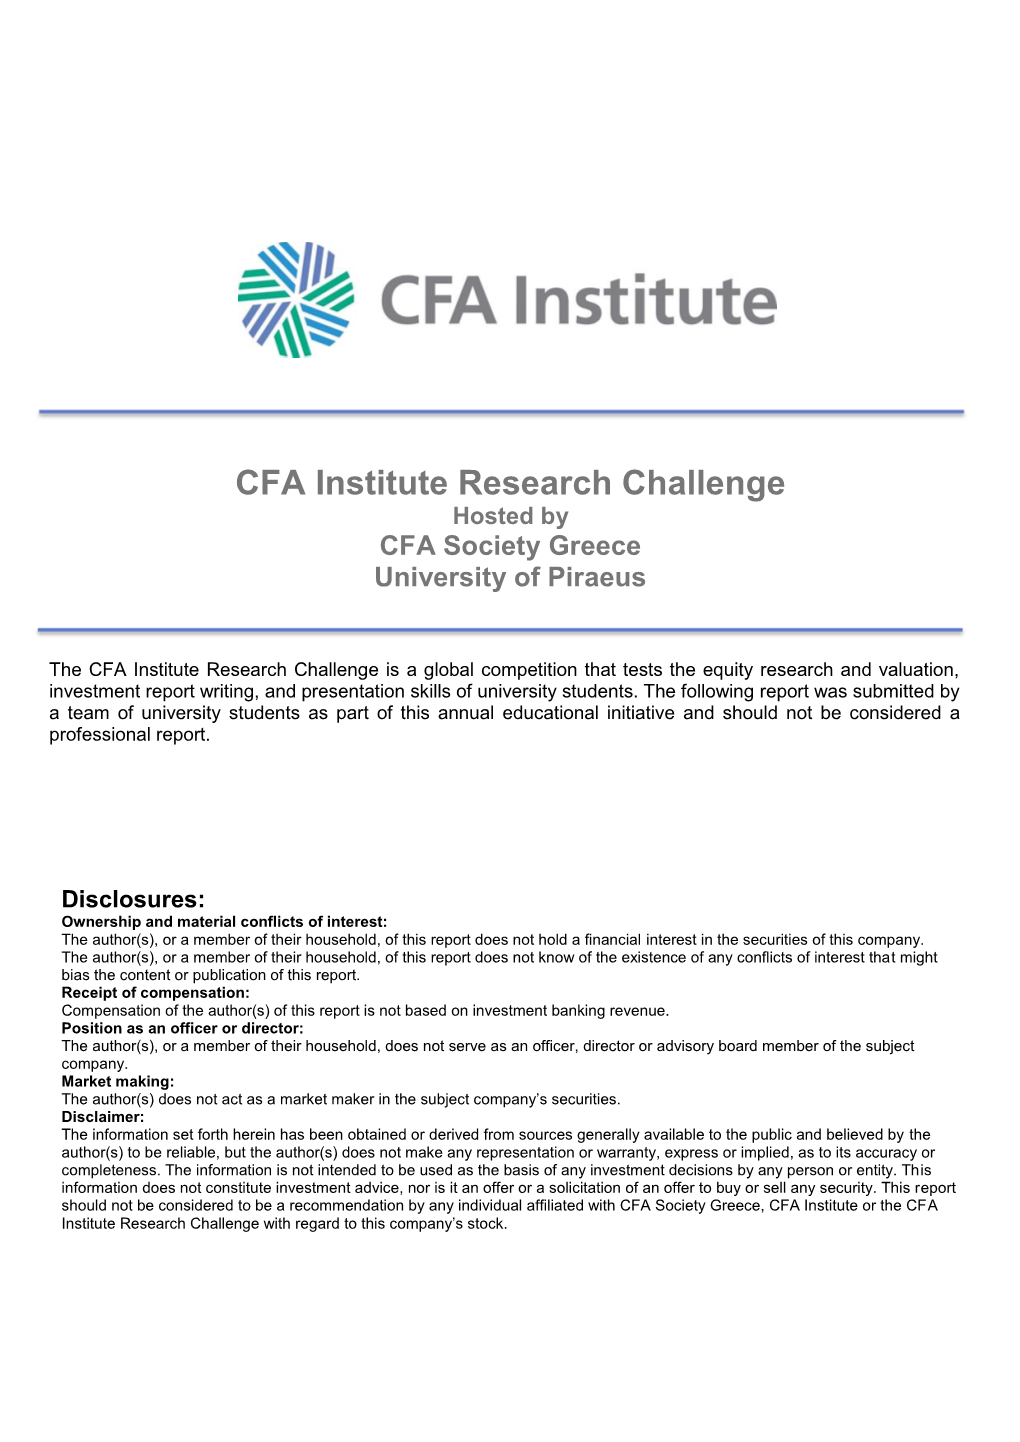 CFA Institute Research Challenge Hosted by CFA Society Greece University of Piraeus